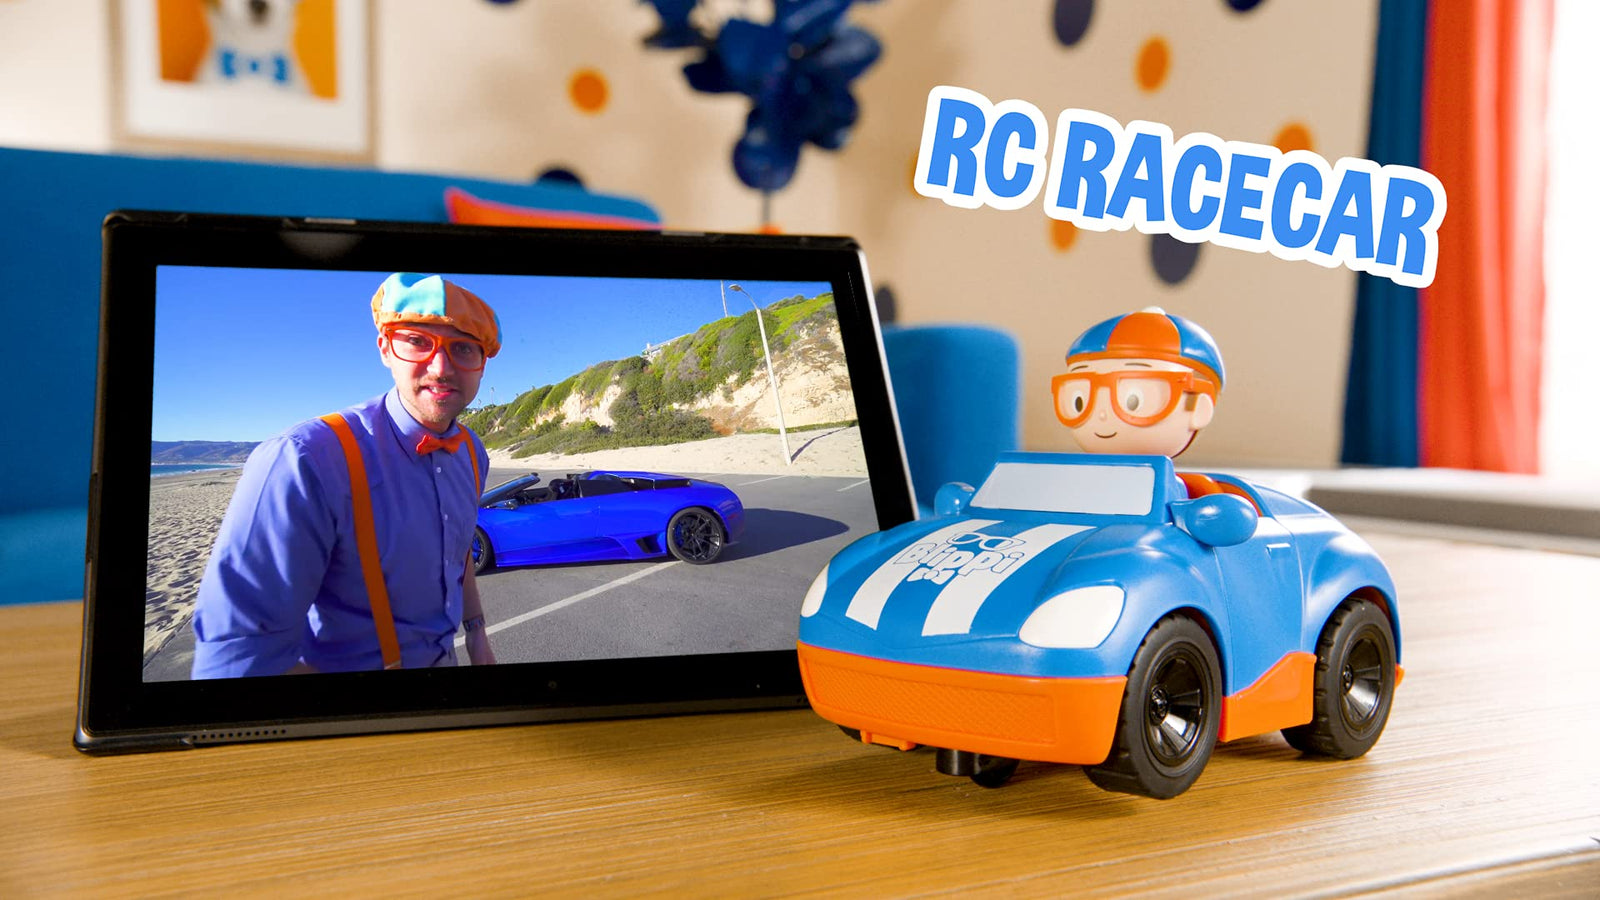 Blippi Racecar - Fun Remote-Controlled Vehicle Seated Inside, Sounds - Educational Vehicles for Toddlers and Young Kids